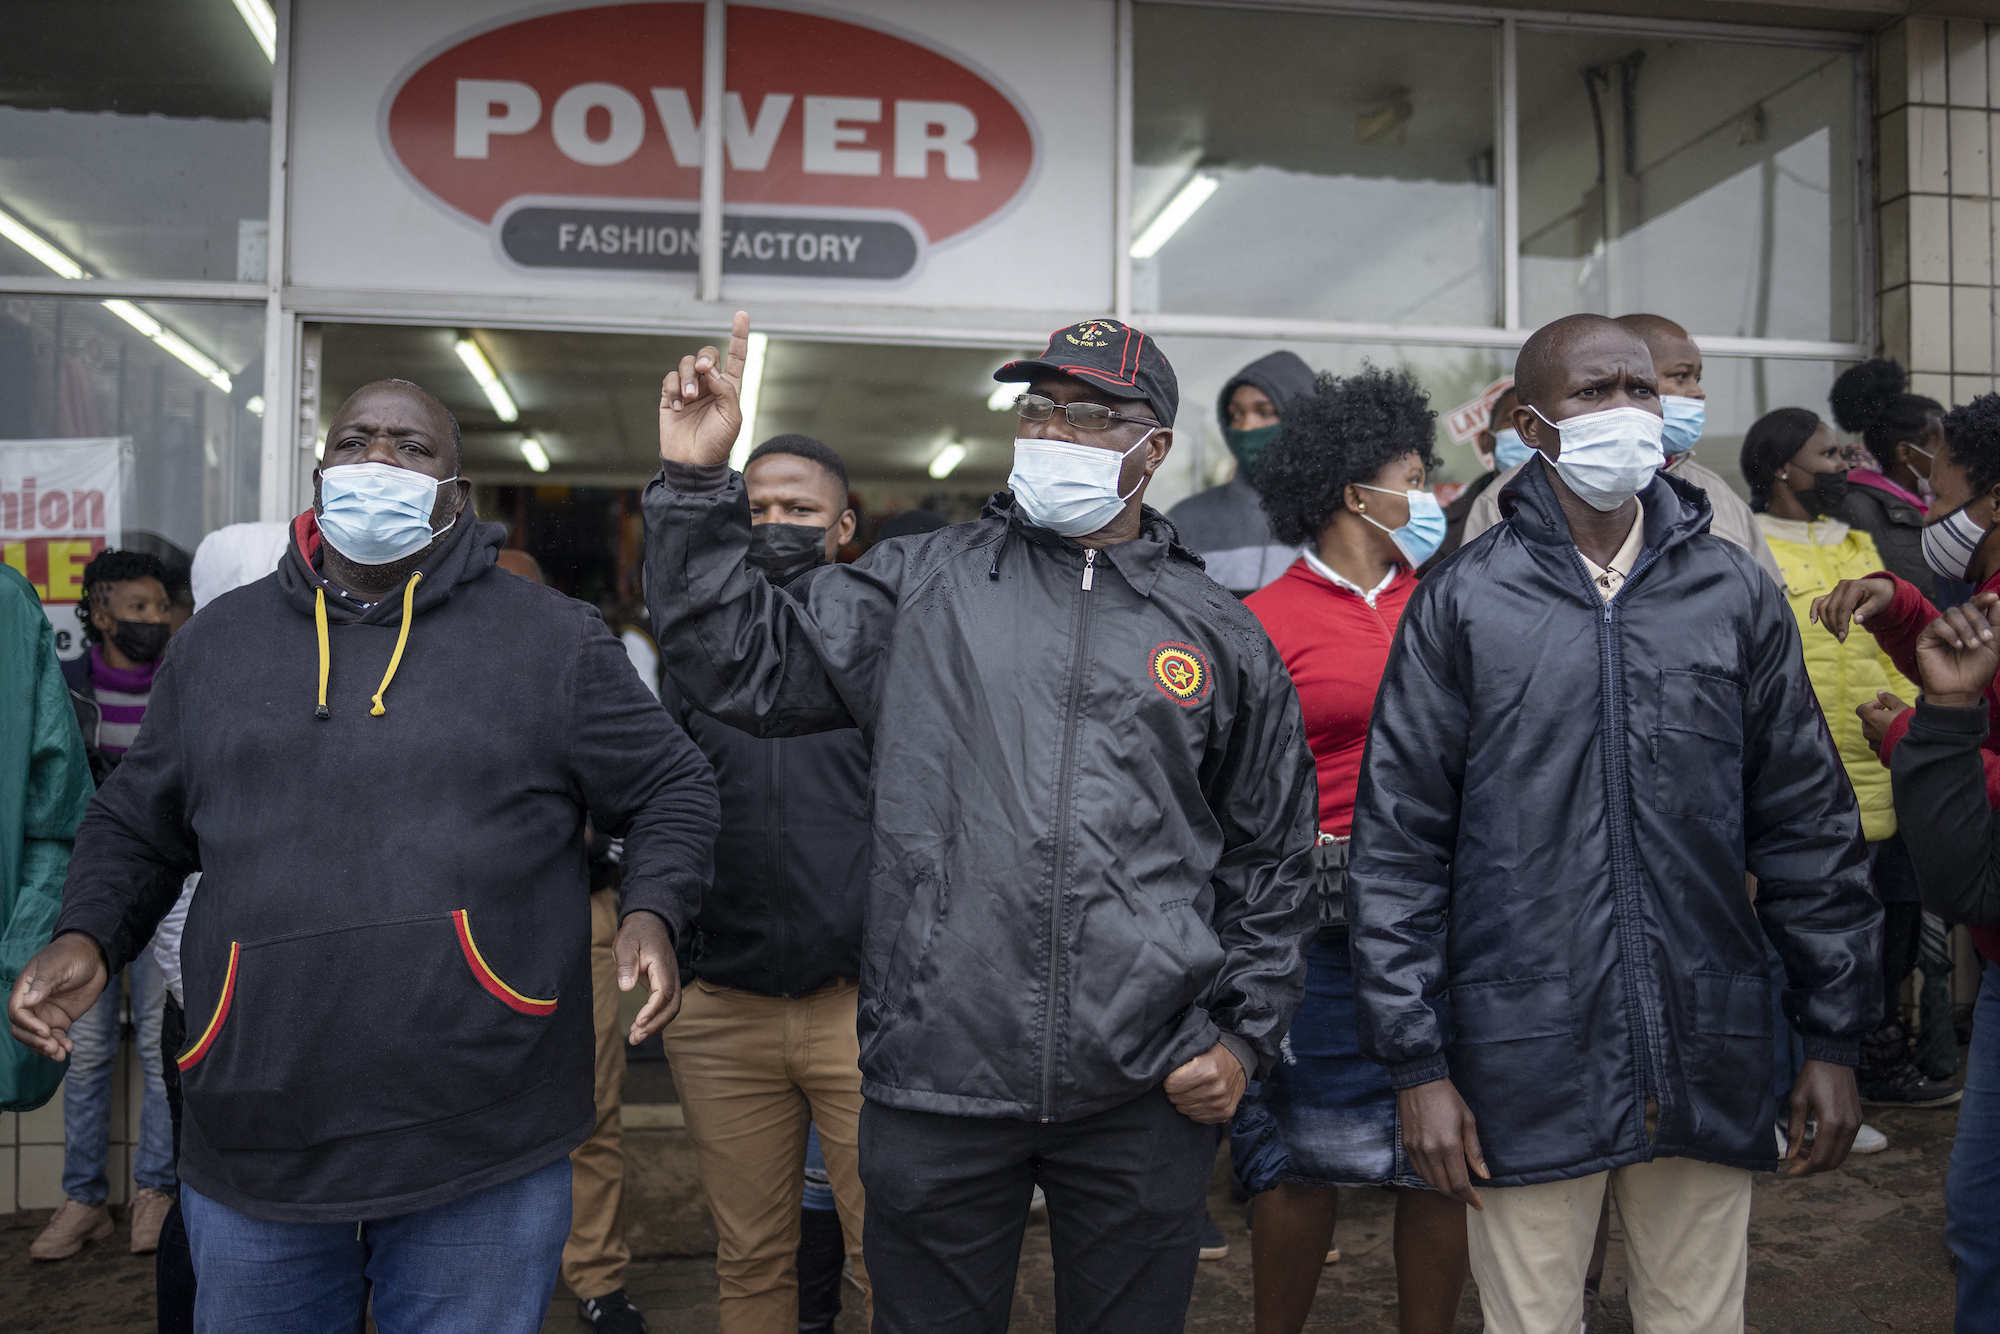 People staging outside a factory in masks protesting